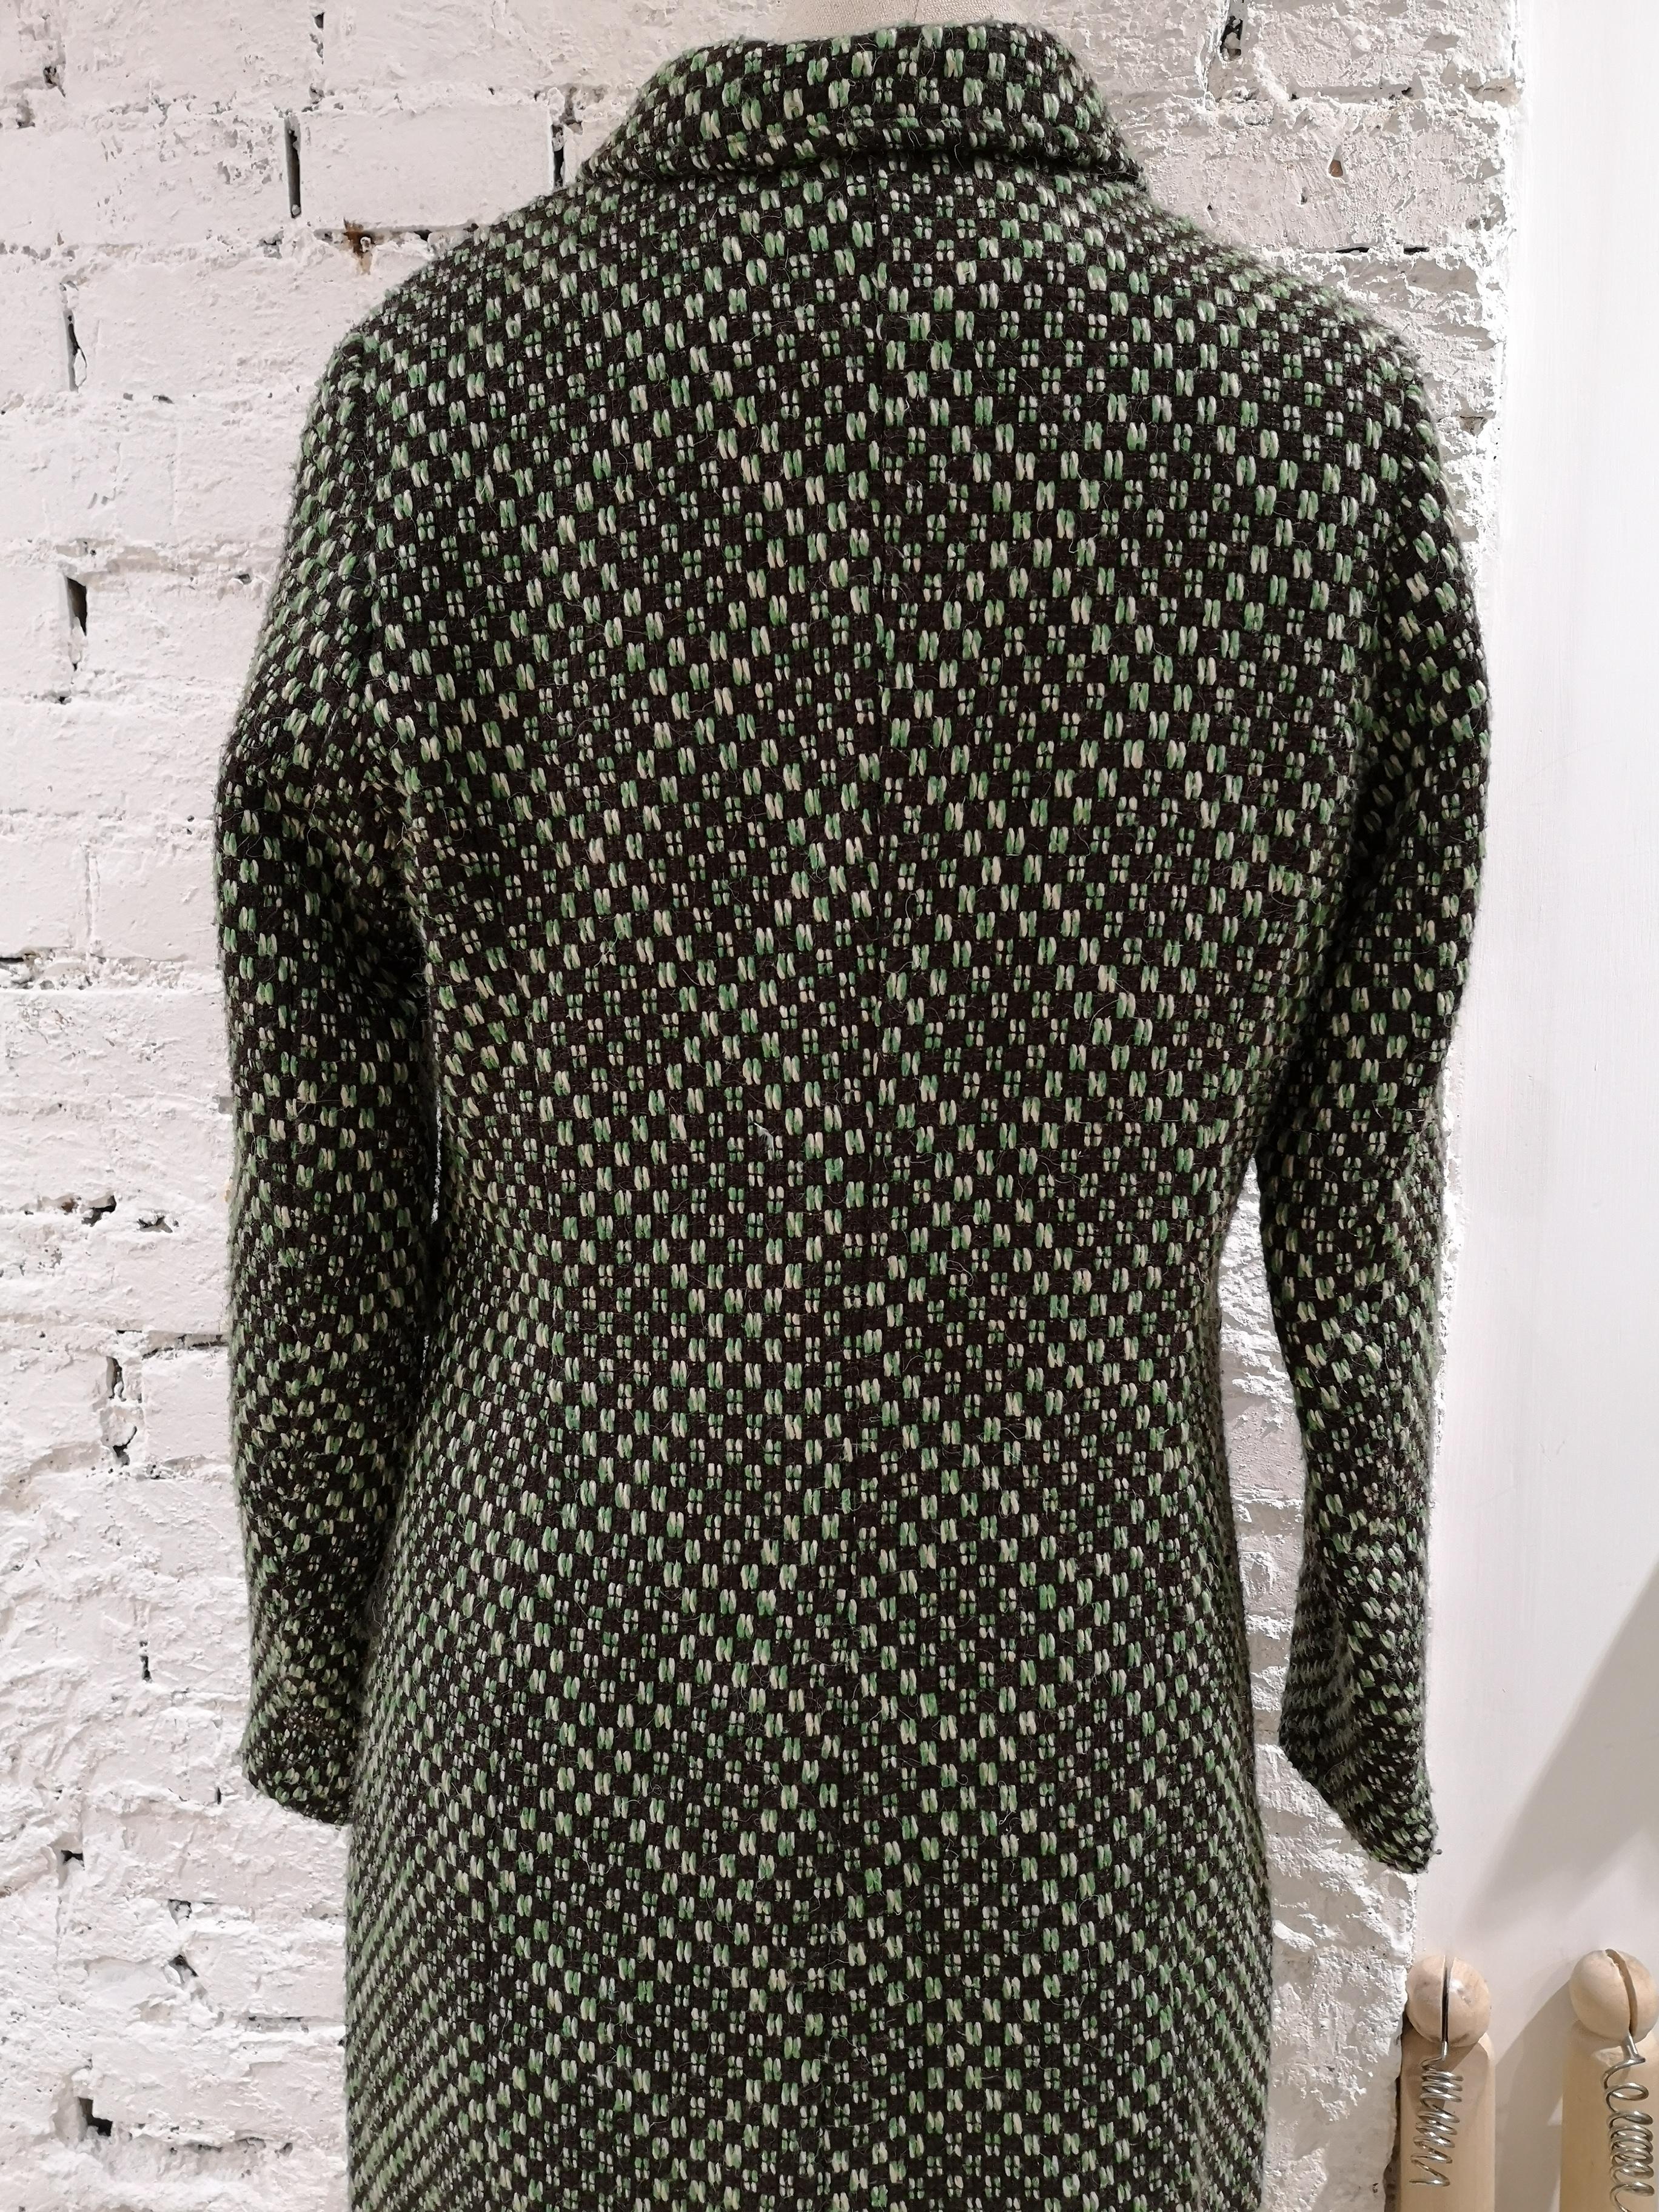 King Louie green wool coat
green multicoloured coat totally made in italy in size FR 36
total lenght 94 cm
shoulder to hem 61 cm